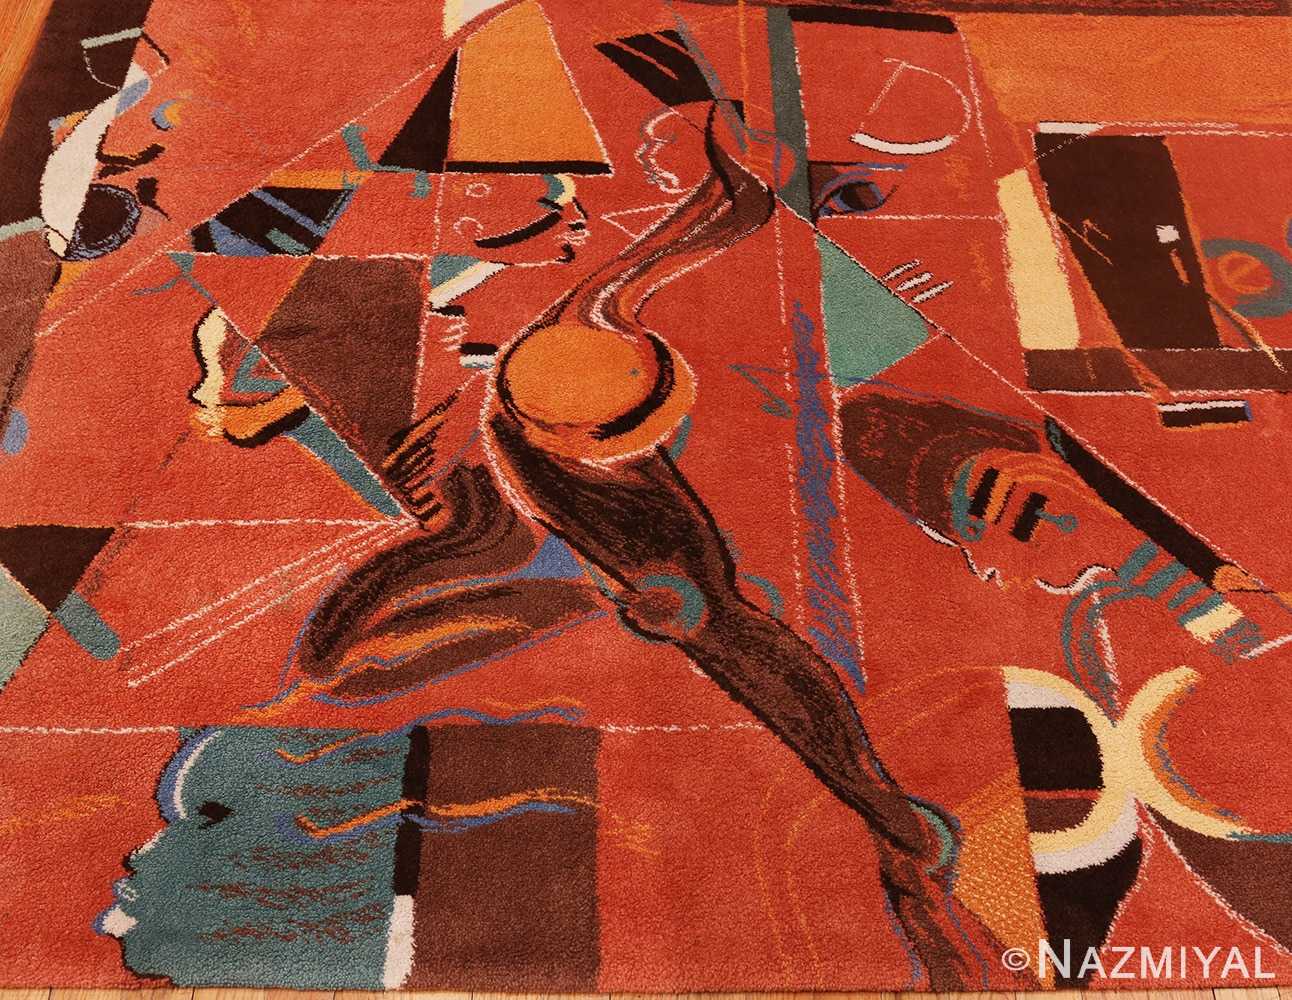 Picture of the center of the Image of the weave of the Vintage Miles Davis Jazz Scene Art Rug 70066